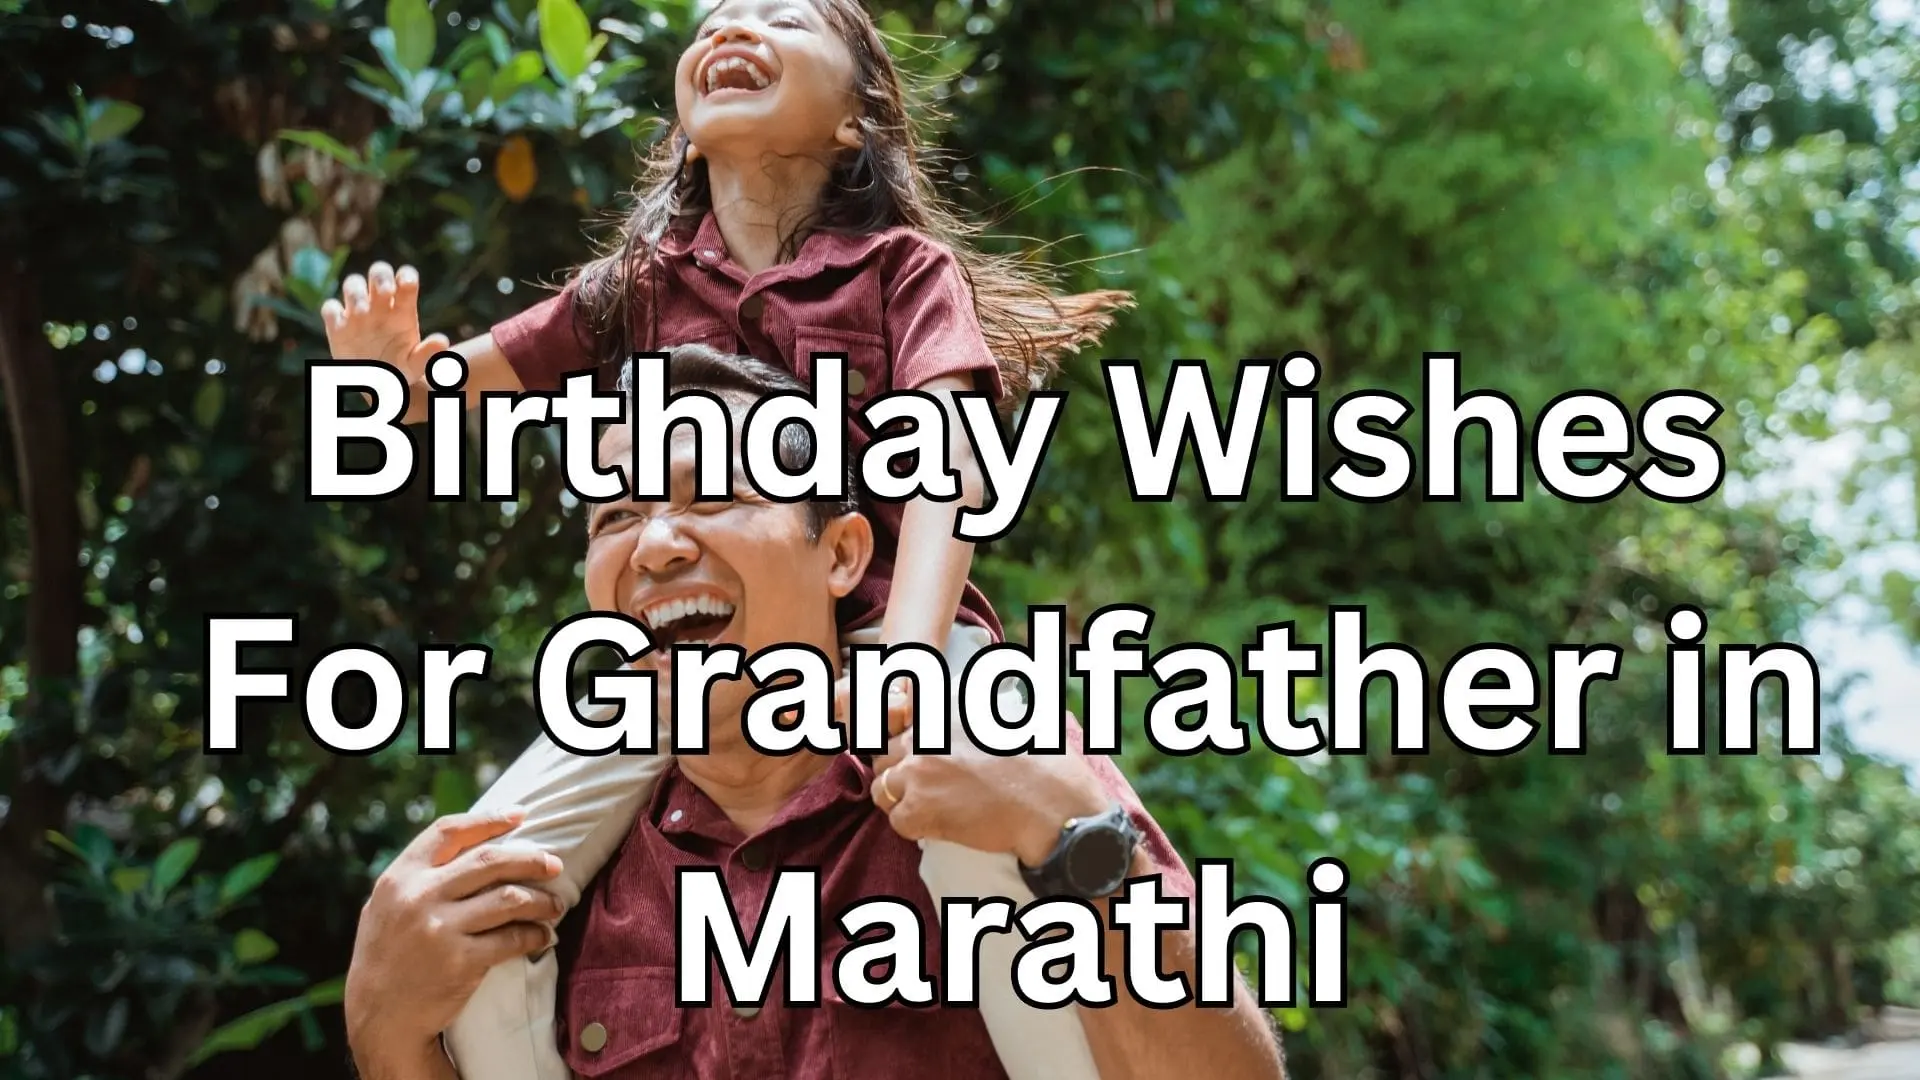 Birthday Wishes For Grandfather in Marathi